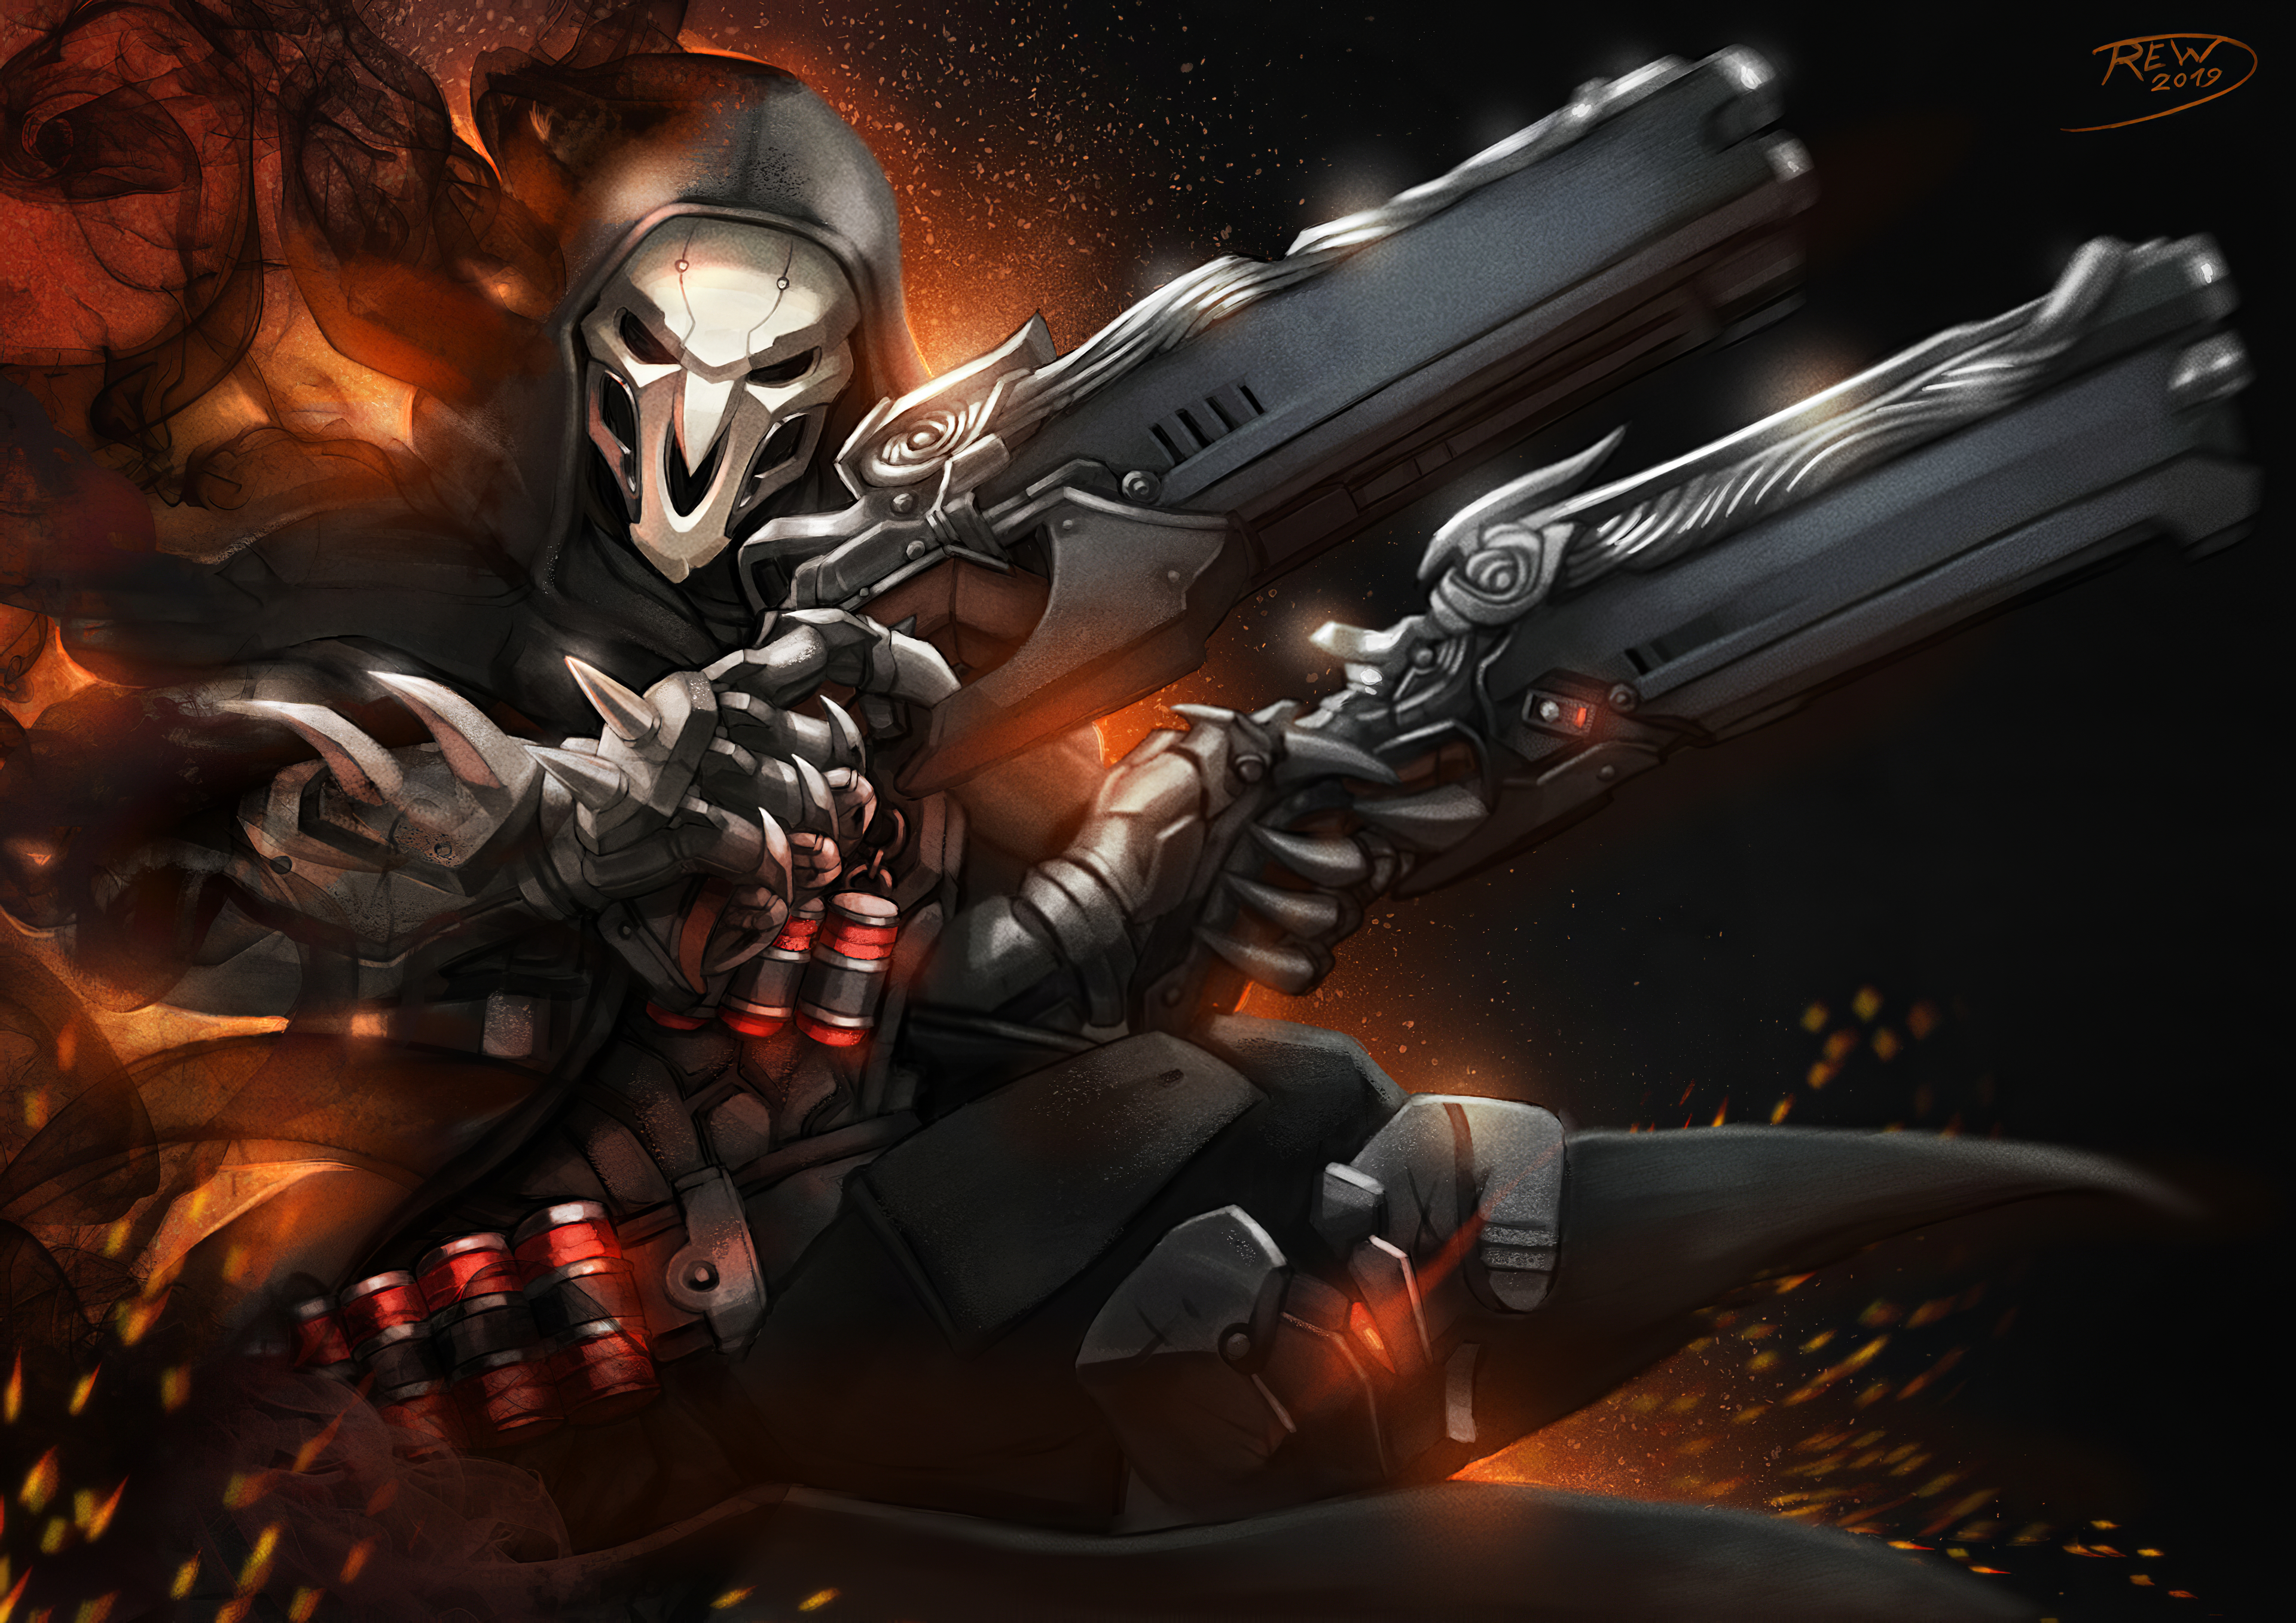 Reaper Overwatch Game Wallpaper Hd Games 4k Wallpapers Images Photos And Background